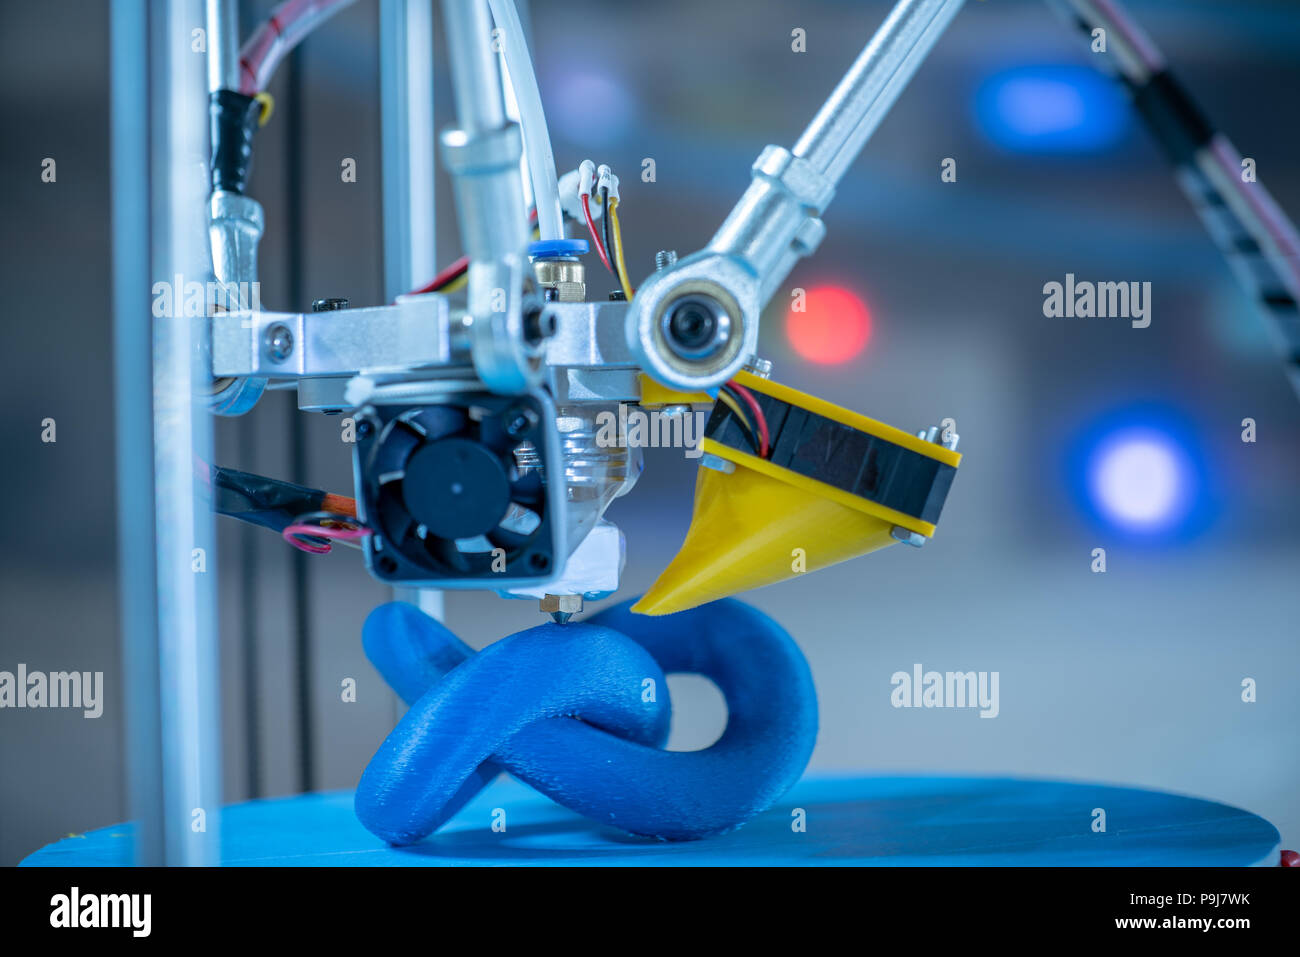 Print parts on a delta 3D printer in industrial lab Stock Photo